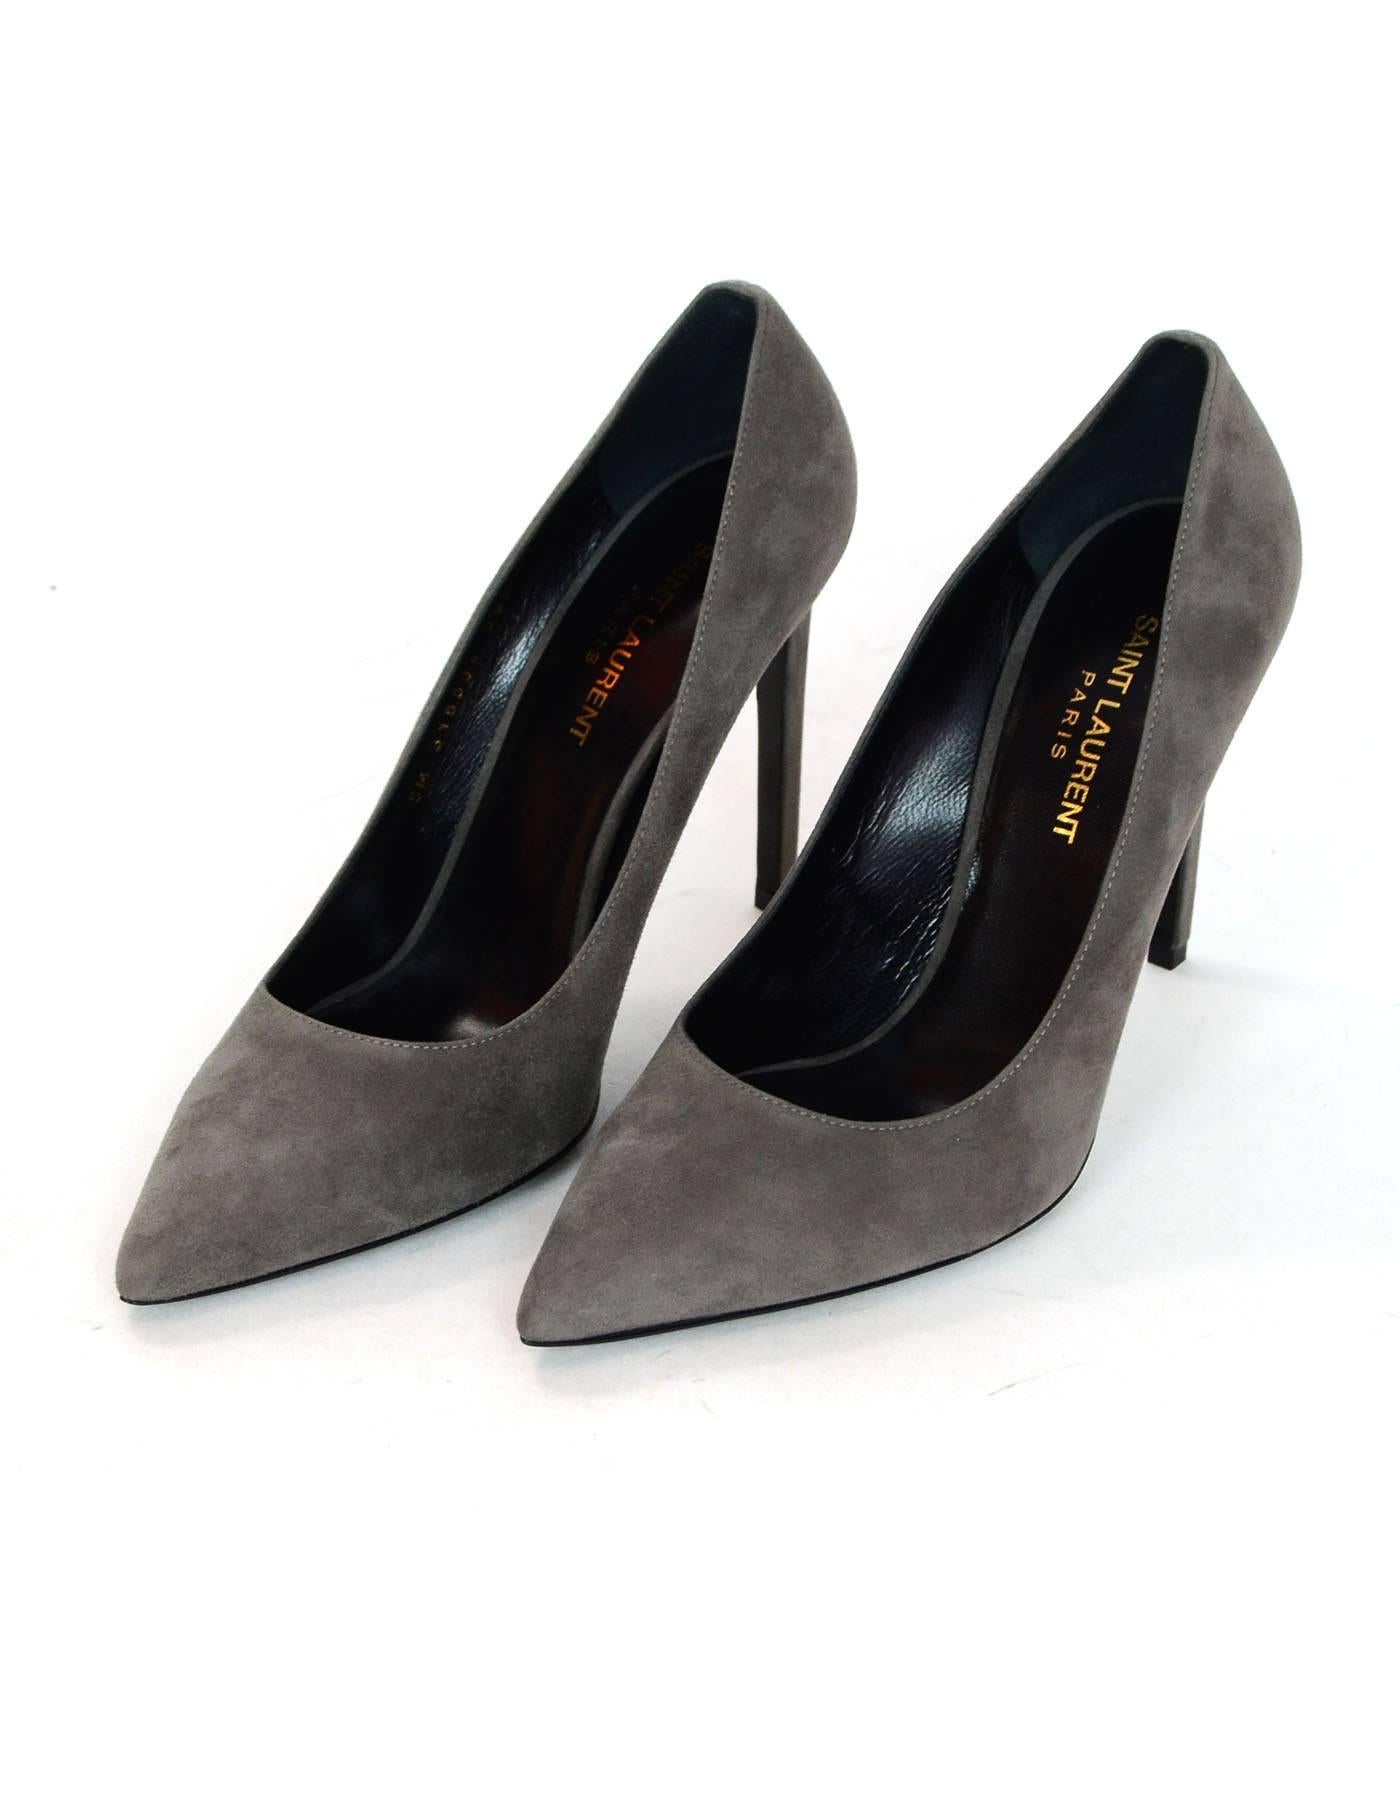 Saint Laurent Grey Suede Paris Skinny Pumps Sz 39.5 NEW

Made In: Italy
Color: Grey
Materials: Suede
Closure/Opening: Slide on
Sole Stamp: Saint Laurent Made in Italy 39.5
Retail Price: $595 + tax
Overall Condition: Excellent pre-owned condition -